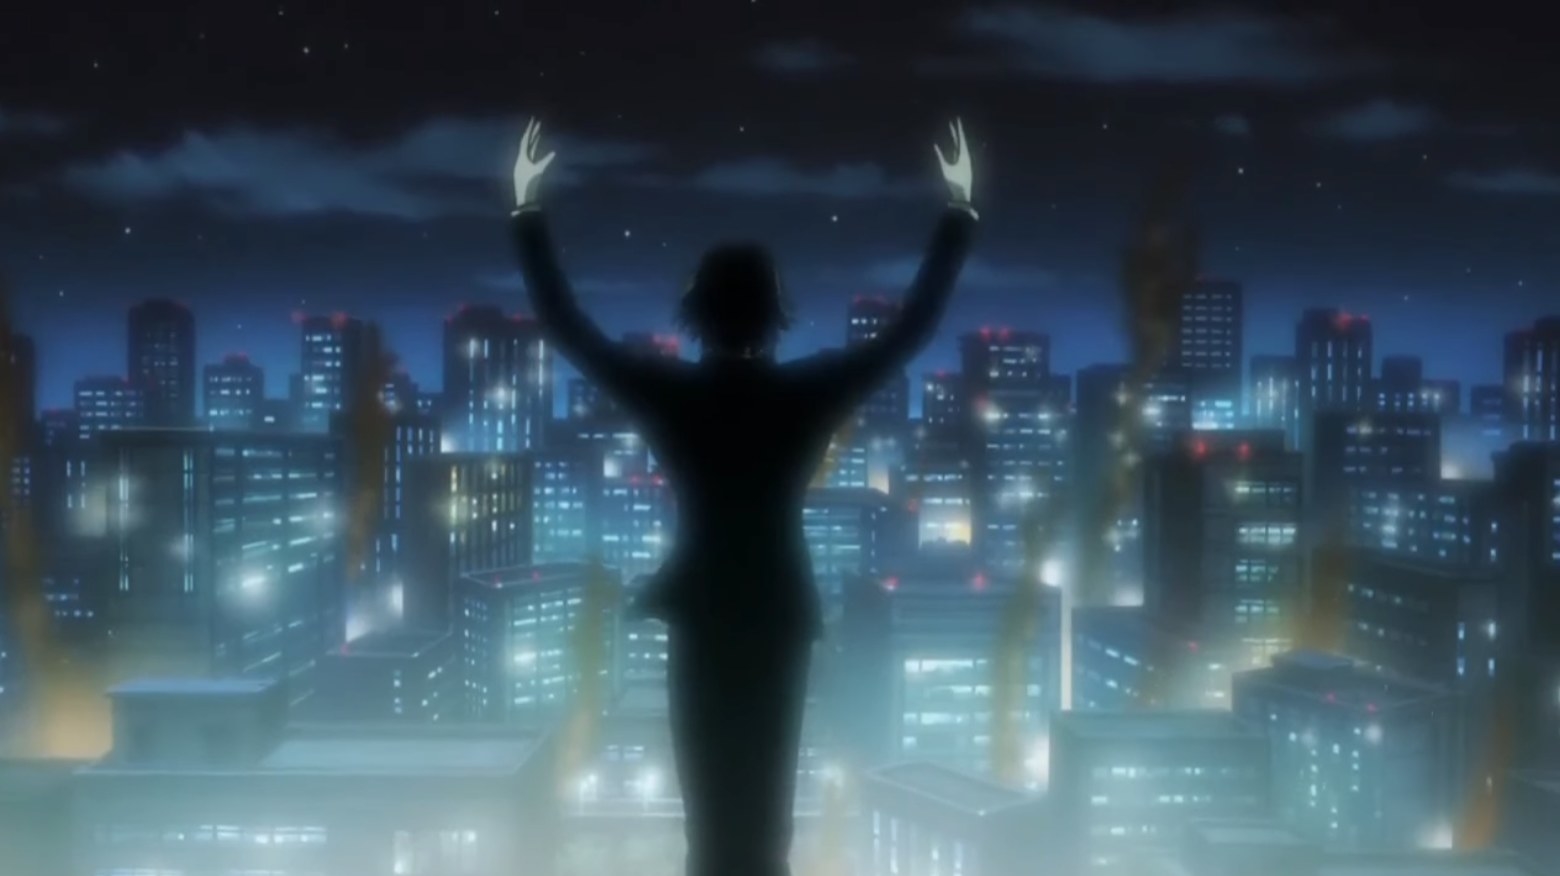 Chrollo holding his arms up like a composer